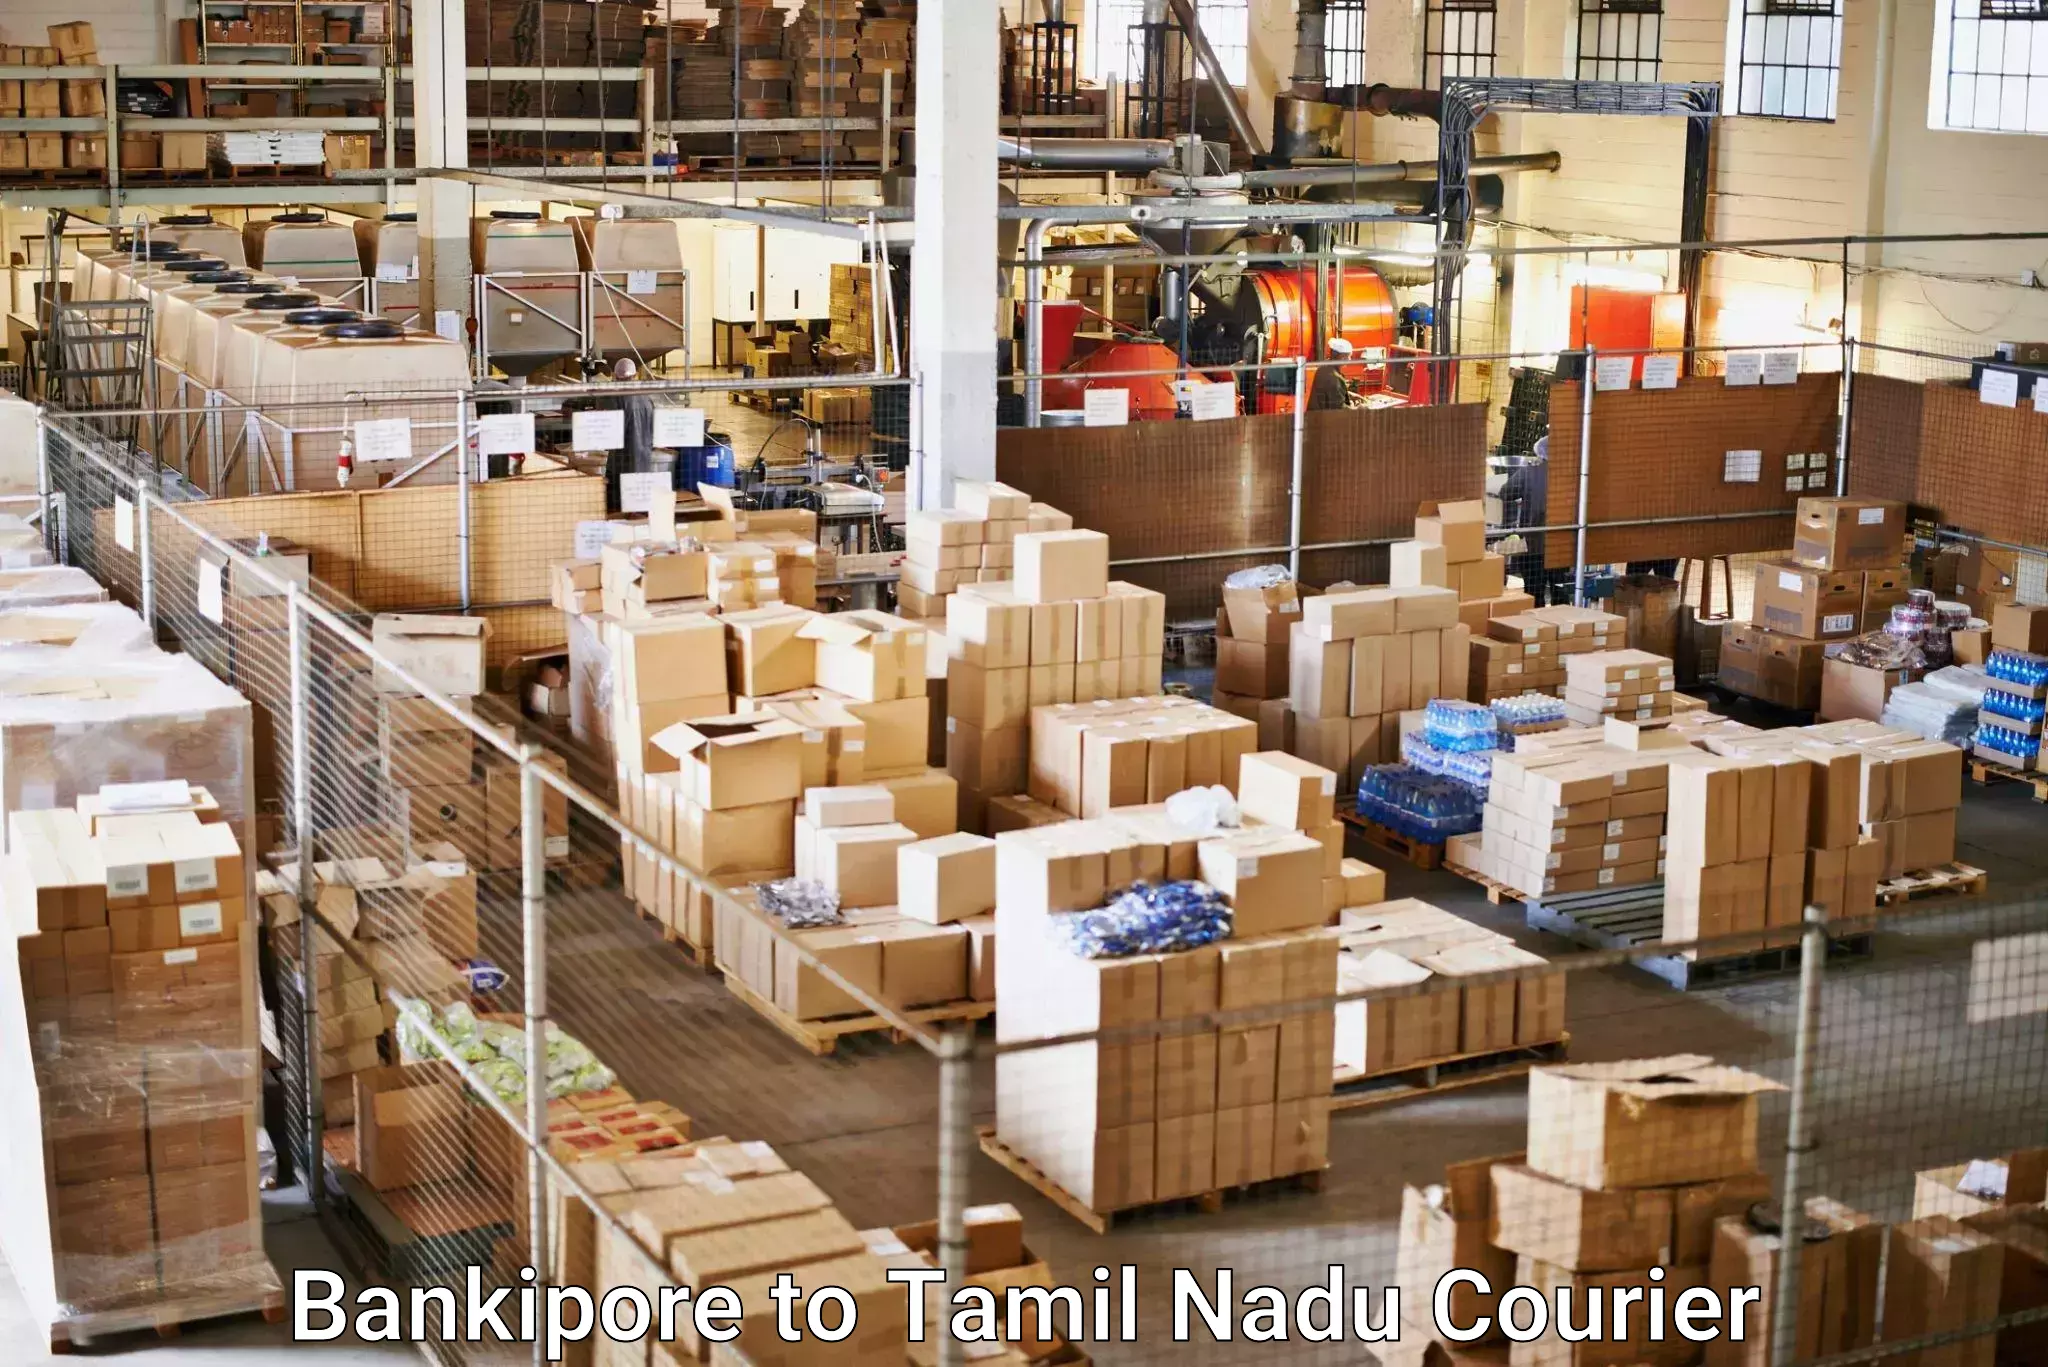 Next-day delivery options Bankipore to Tirupattur